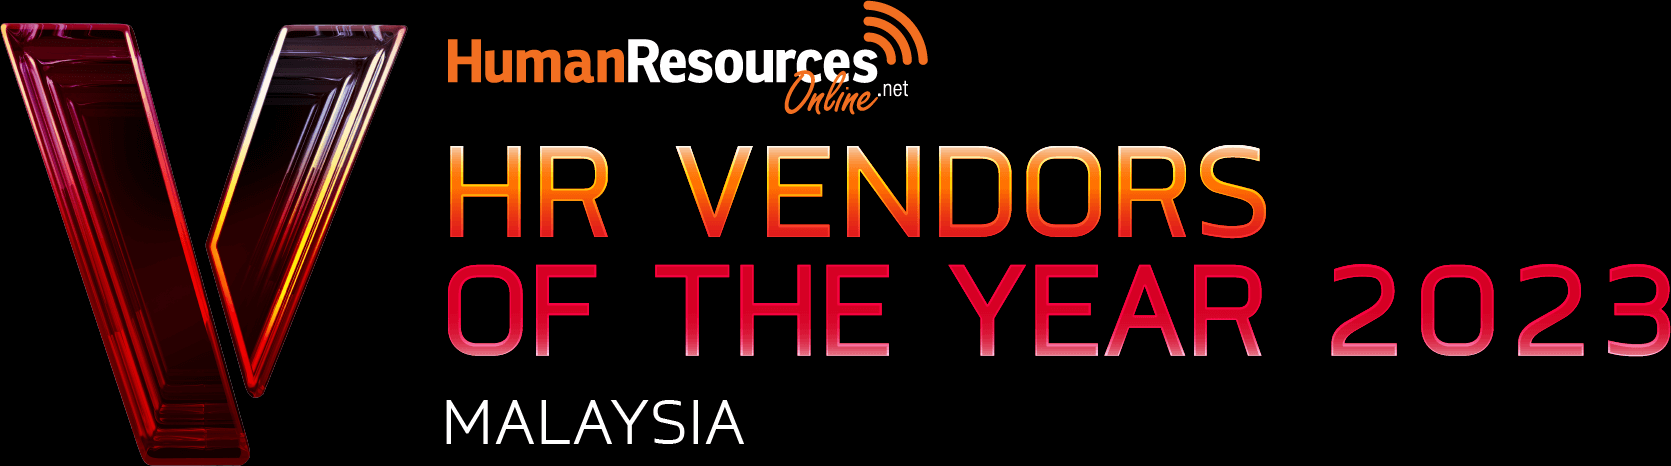 HR Vendors of the Year awards 2023 Malaysia